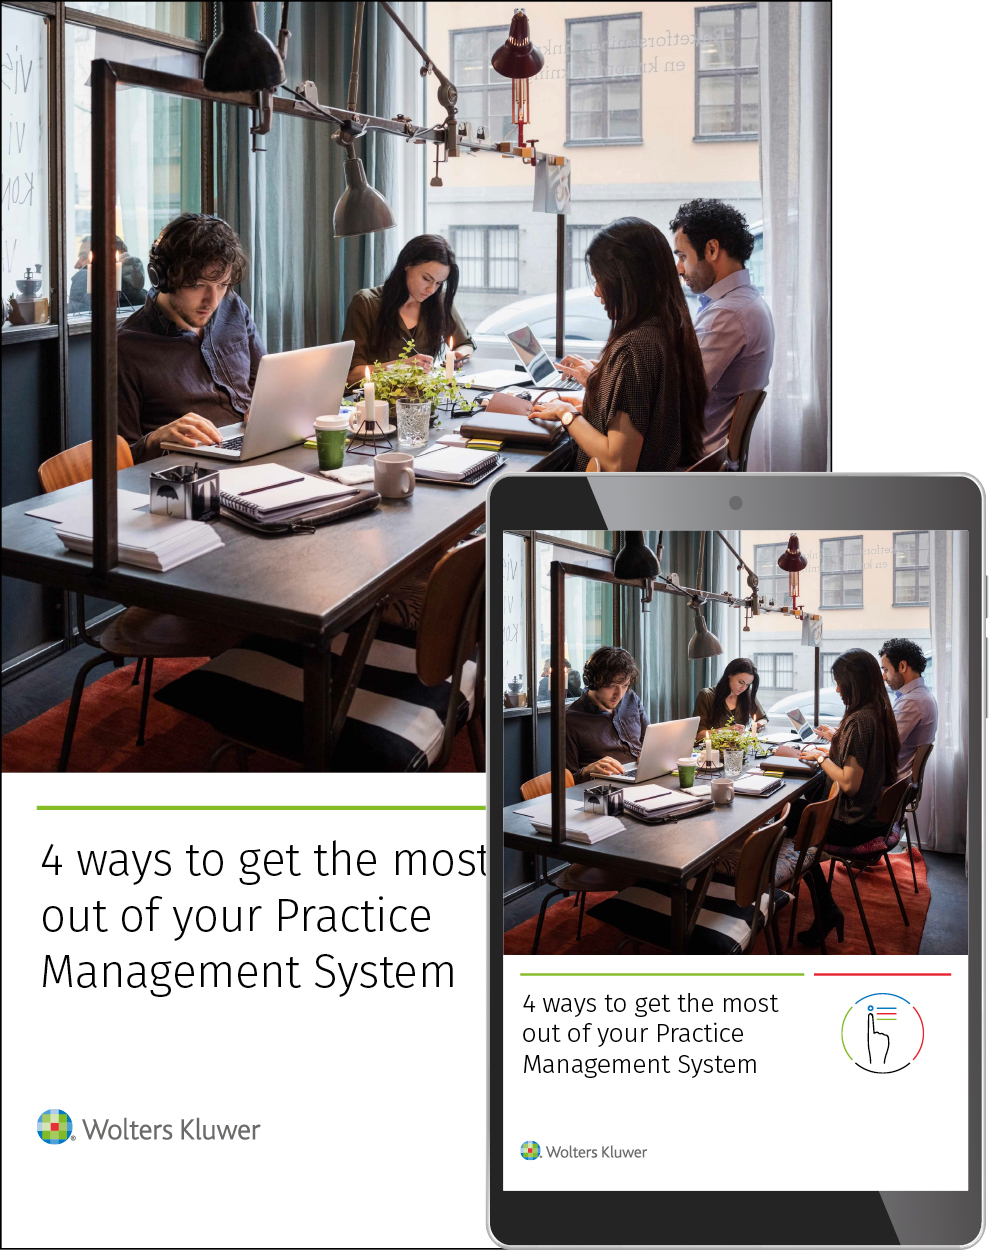 4 ways to get the most out of your practice management system ebook cover, also on tablet screen